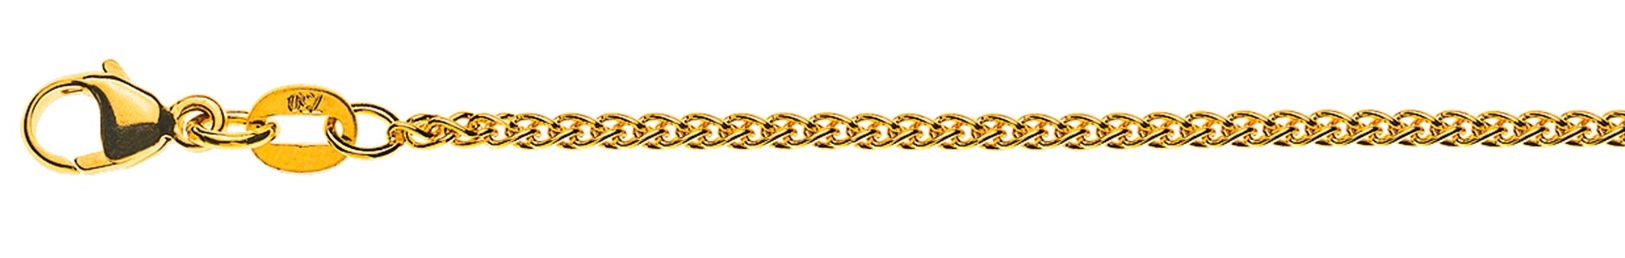 AURONOS Style Necklace yellow gold 9K cable chain 5cm 1.65mm